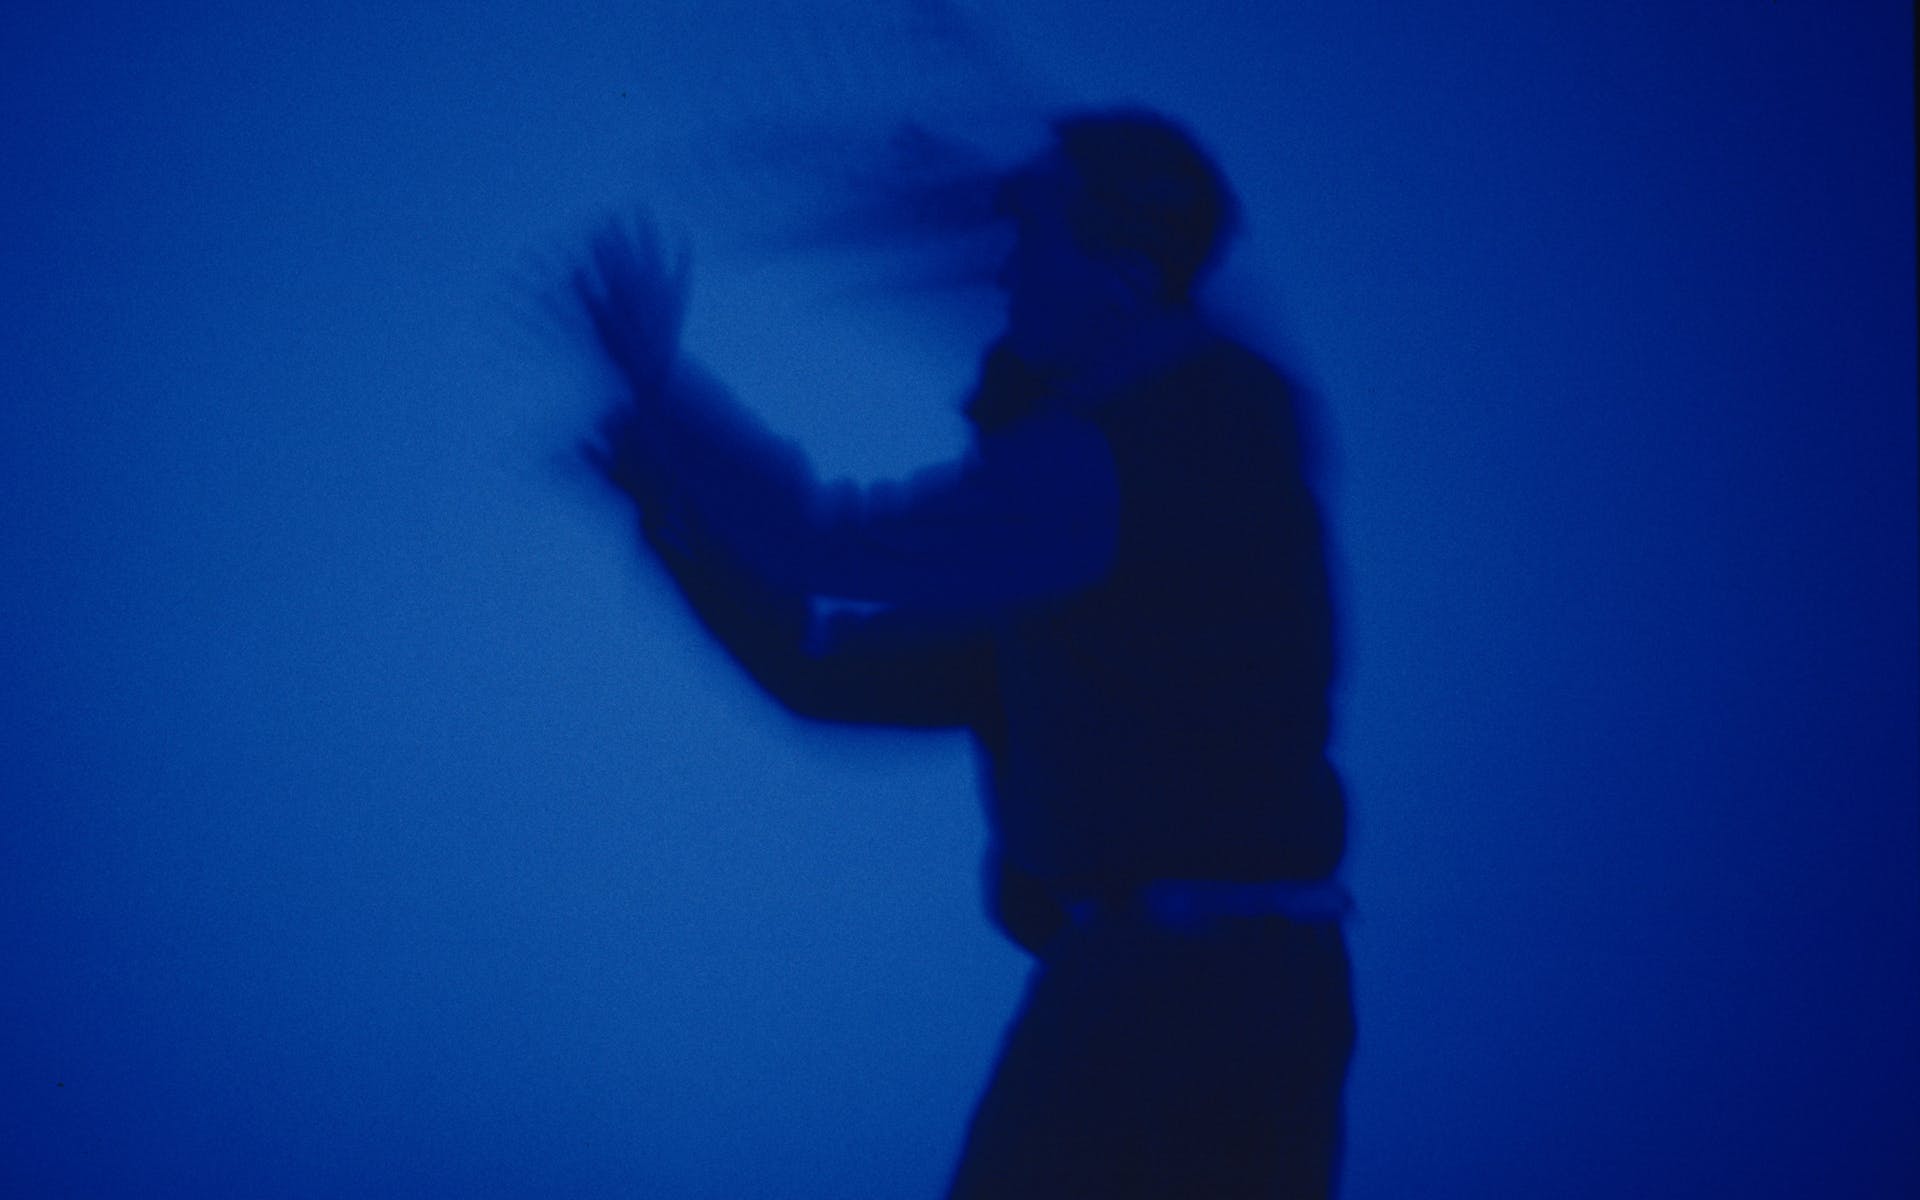 Silhouette of man in motion in front of blue screen